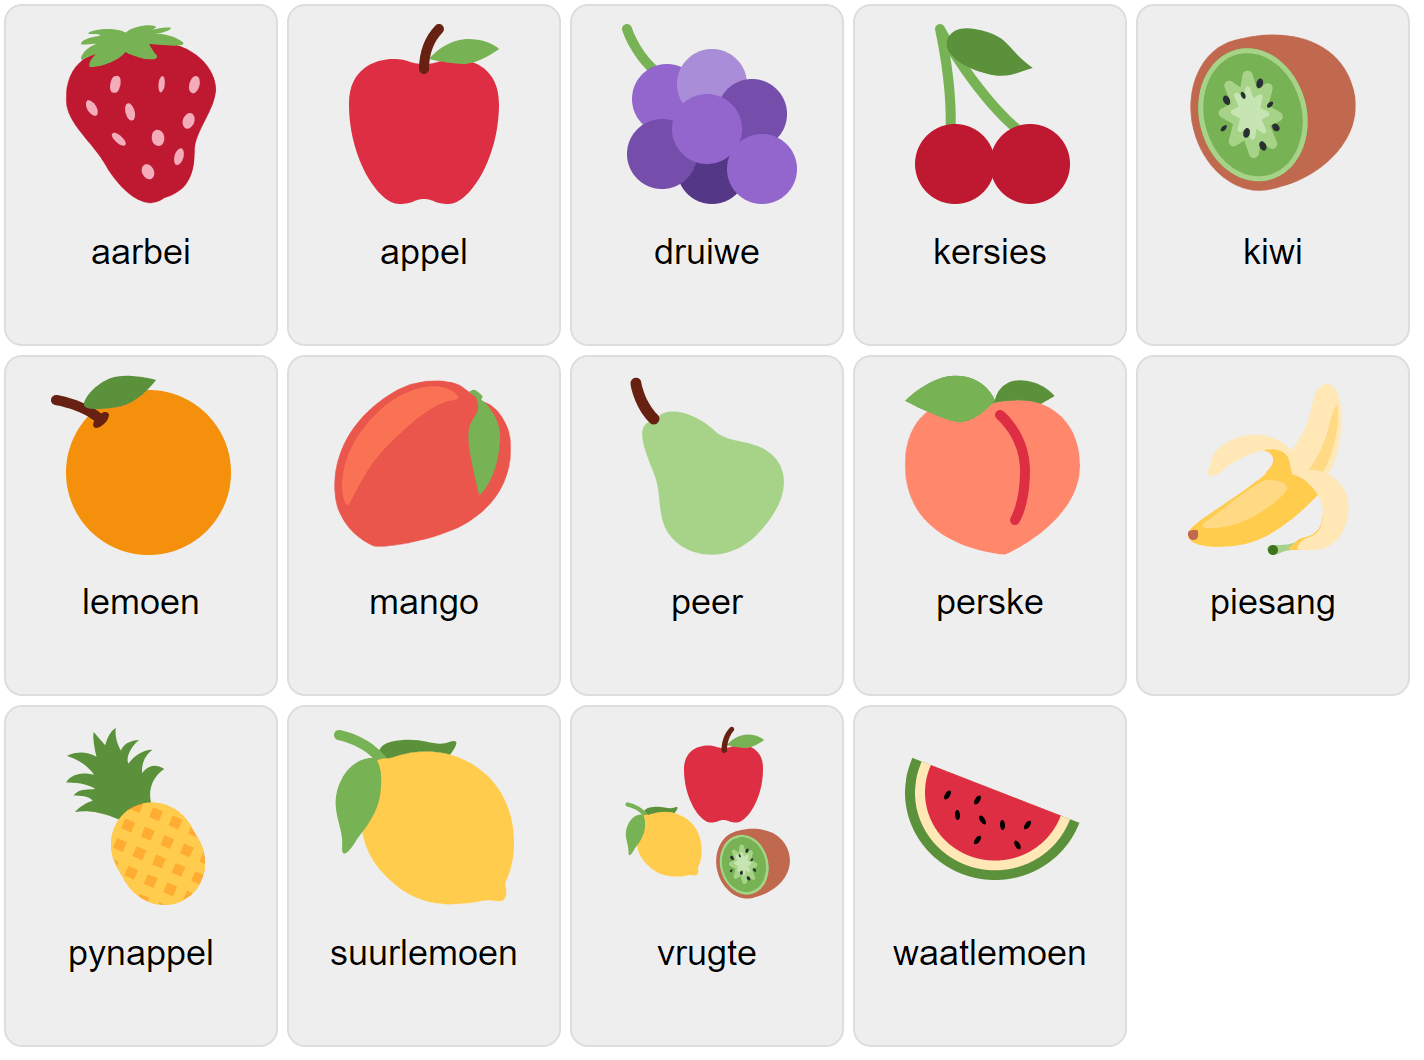 Fruits in Afrikaans